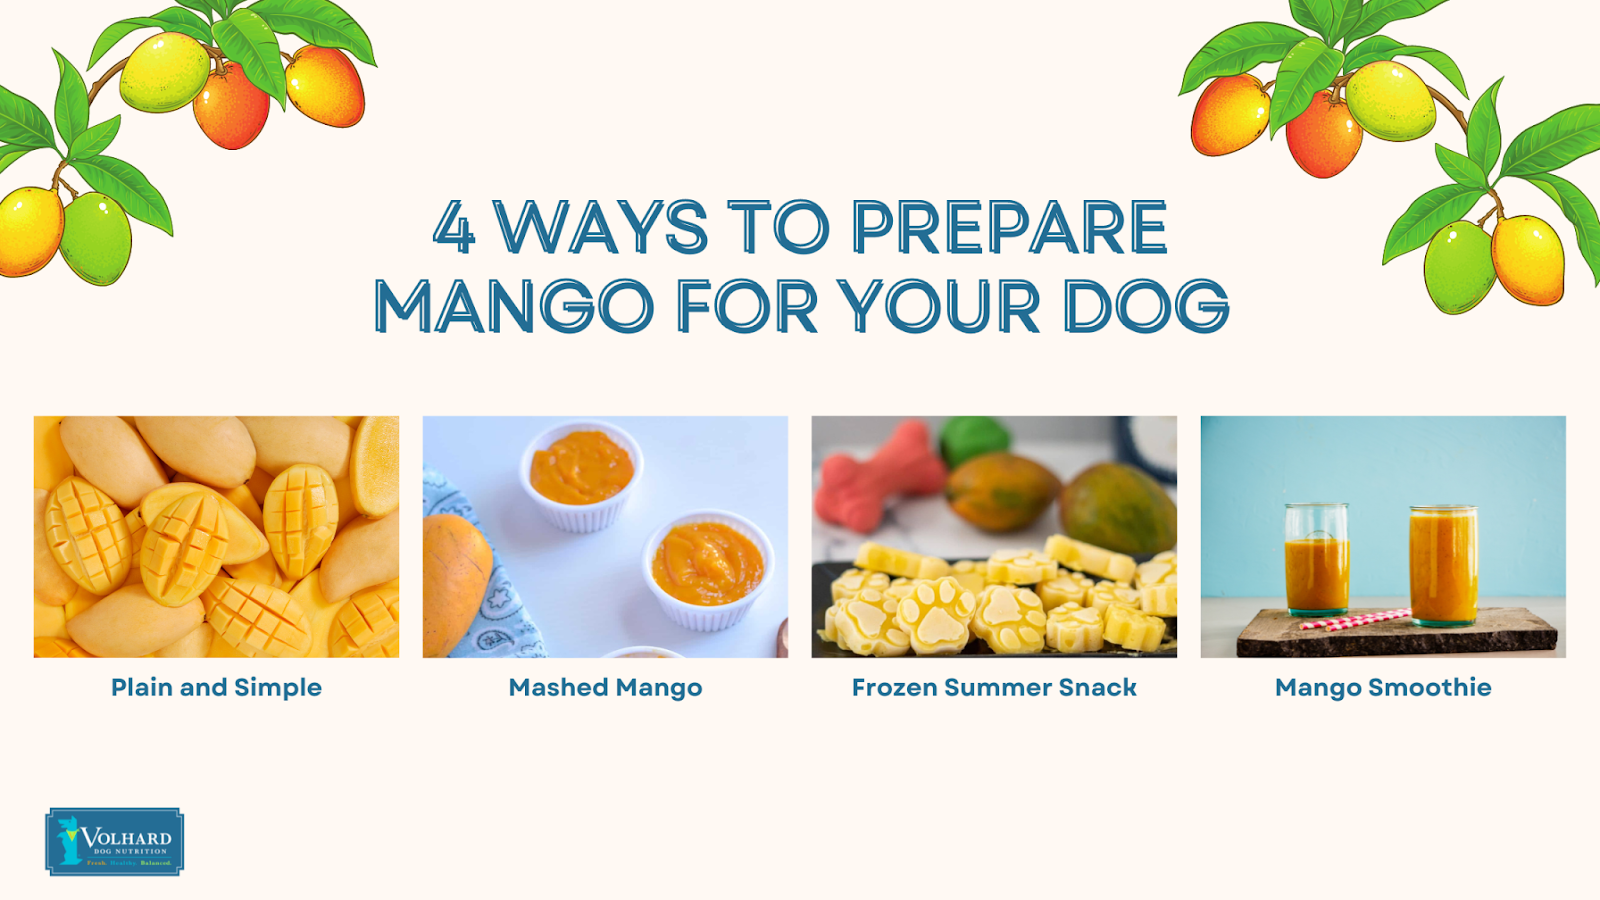 How to prepare mango for dogs